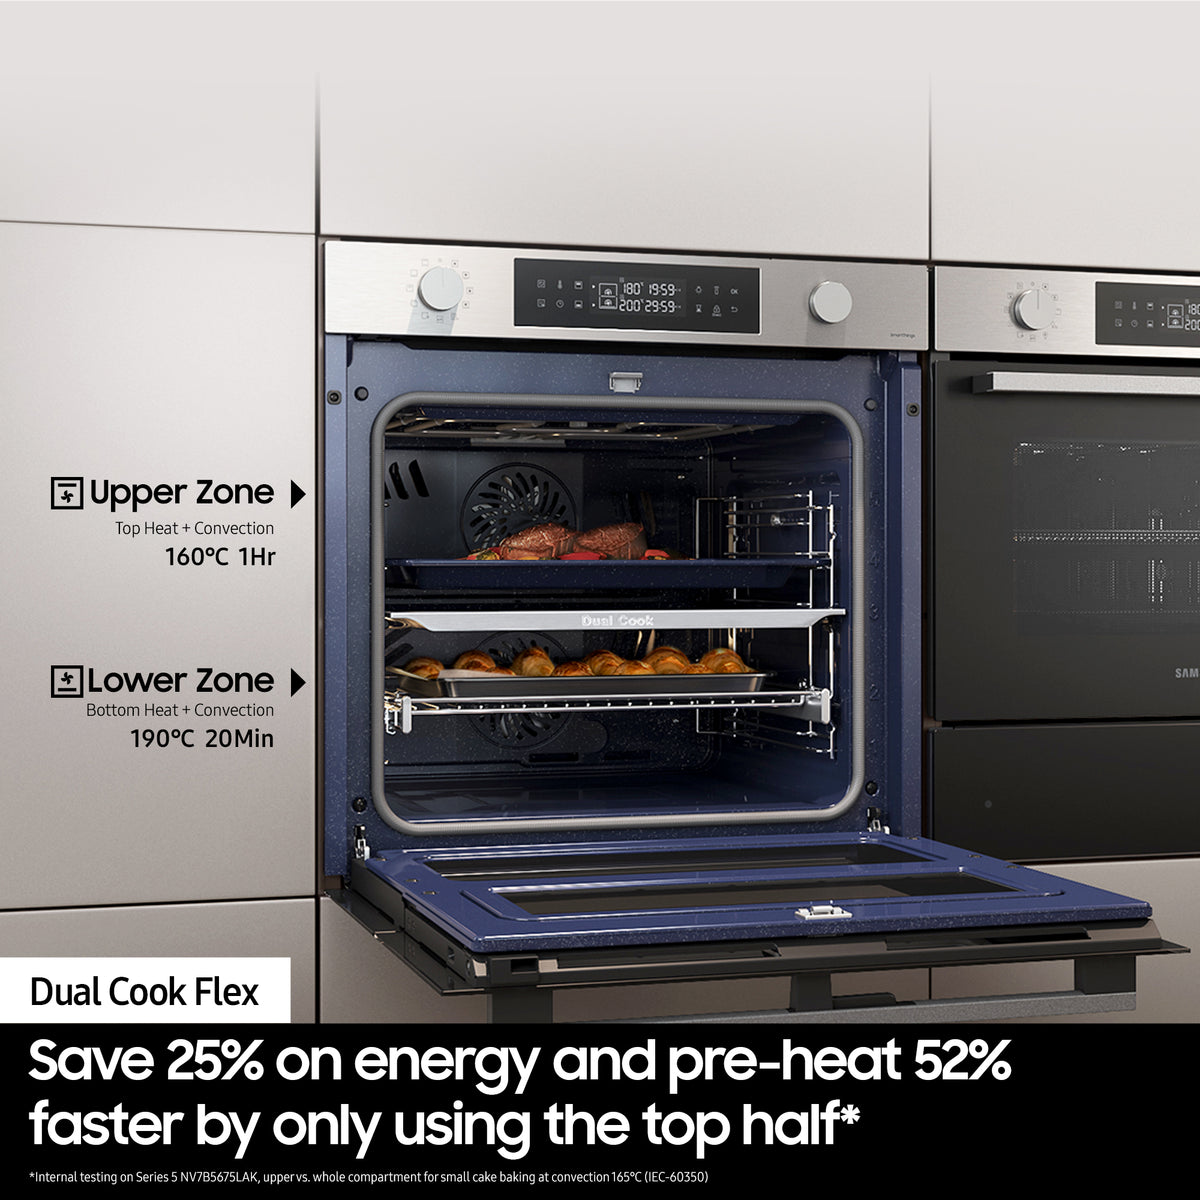 Samsung Series 4 76L Electric Smart Oven with Dual Cook - Black | NV7B4355VAK/U4 from Samsung - DID Electrical